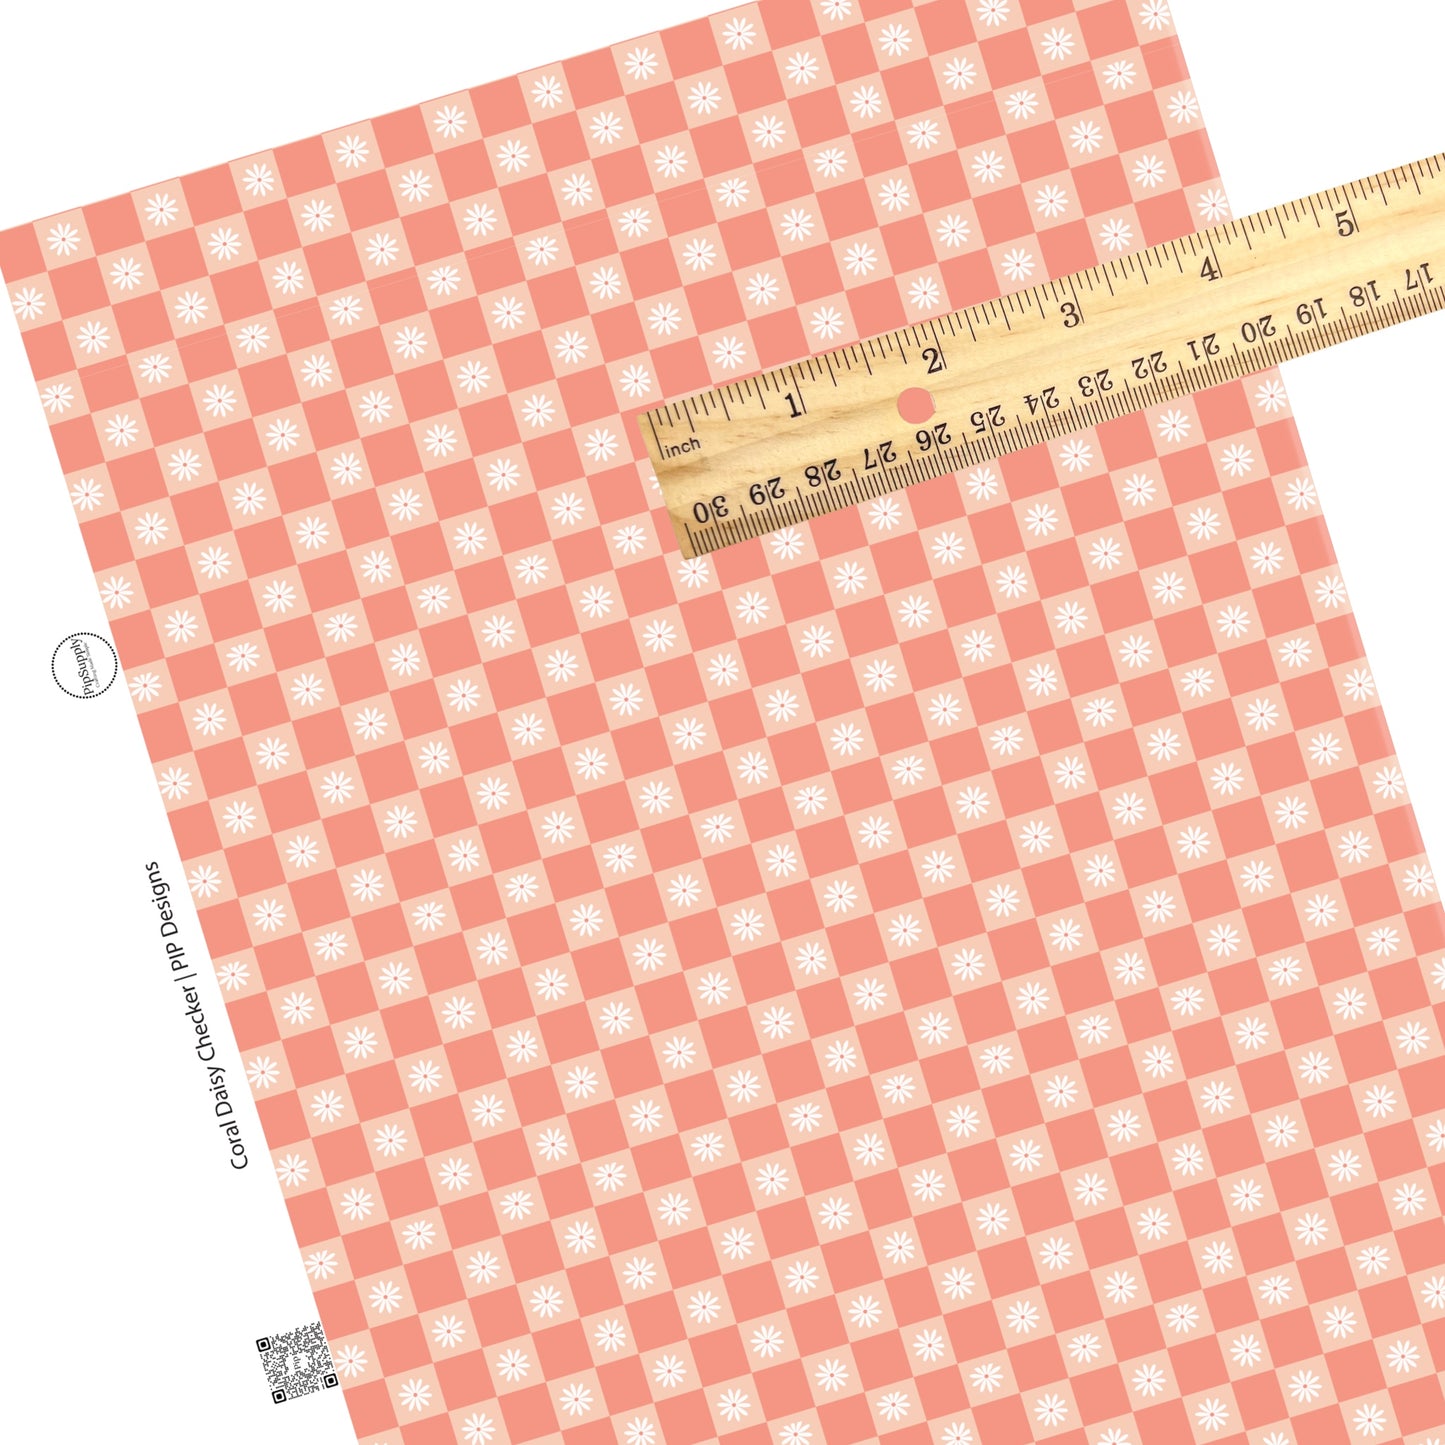 These spring checker faux leather sheets contain the following design elements: daisy flowers on coral checker pattern. Our CPSIA compliant faux leather sheets or rolls can be used for all types of crafting projects. The designer of this pattern is Hay Sis Hay. 